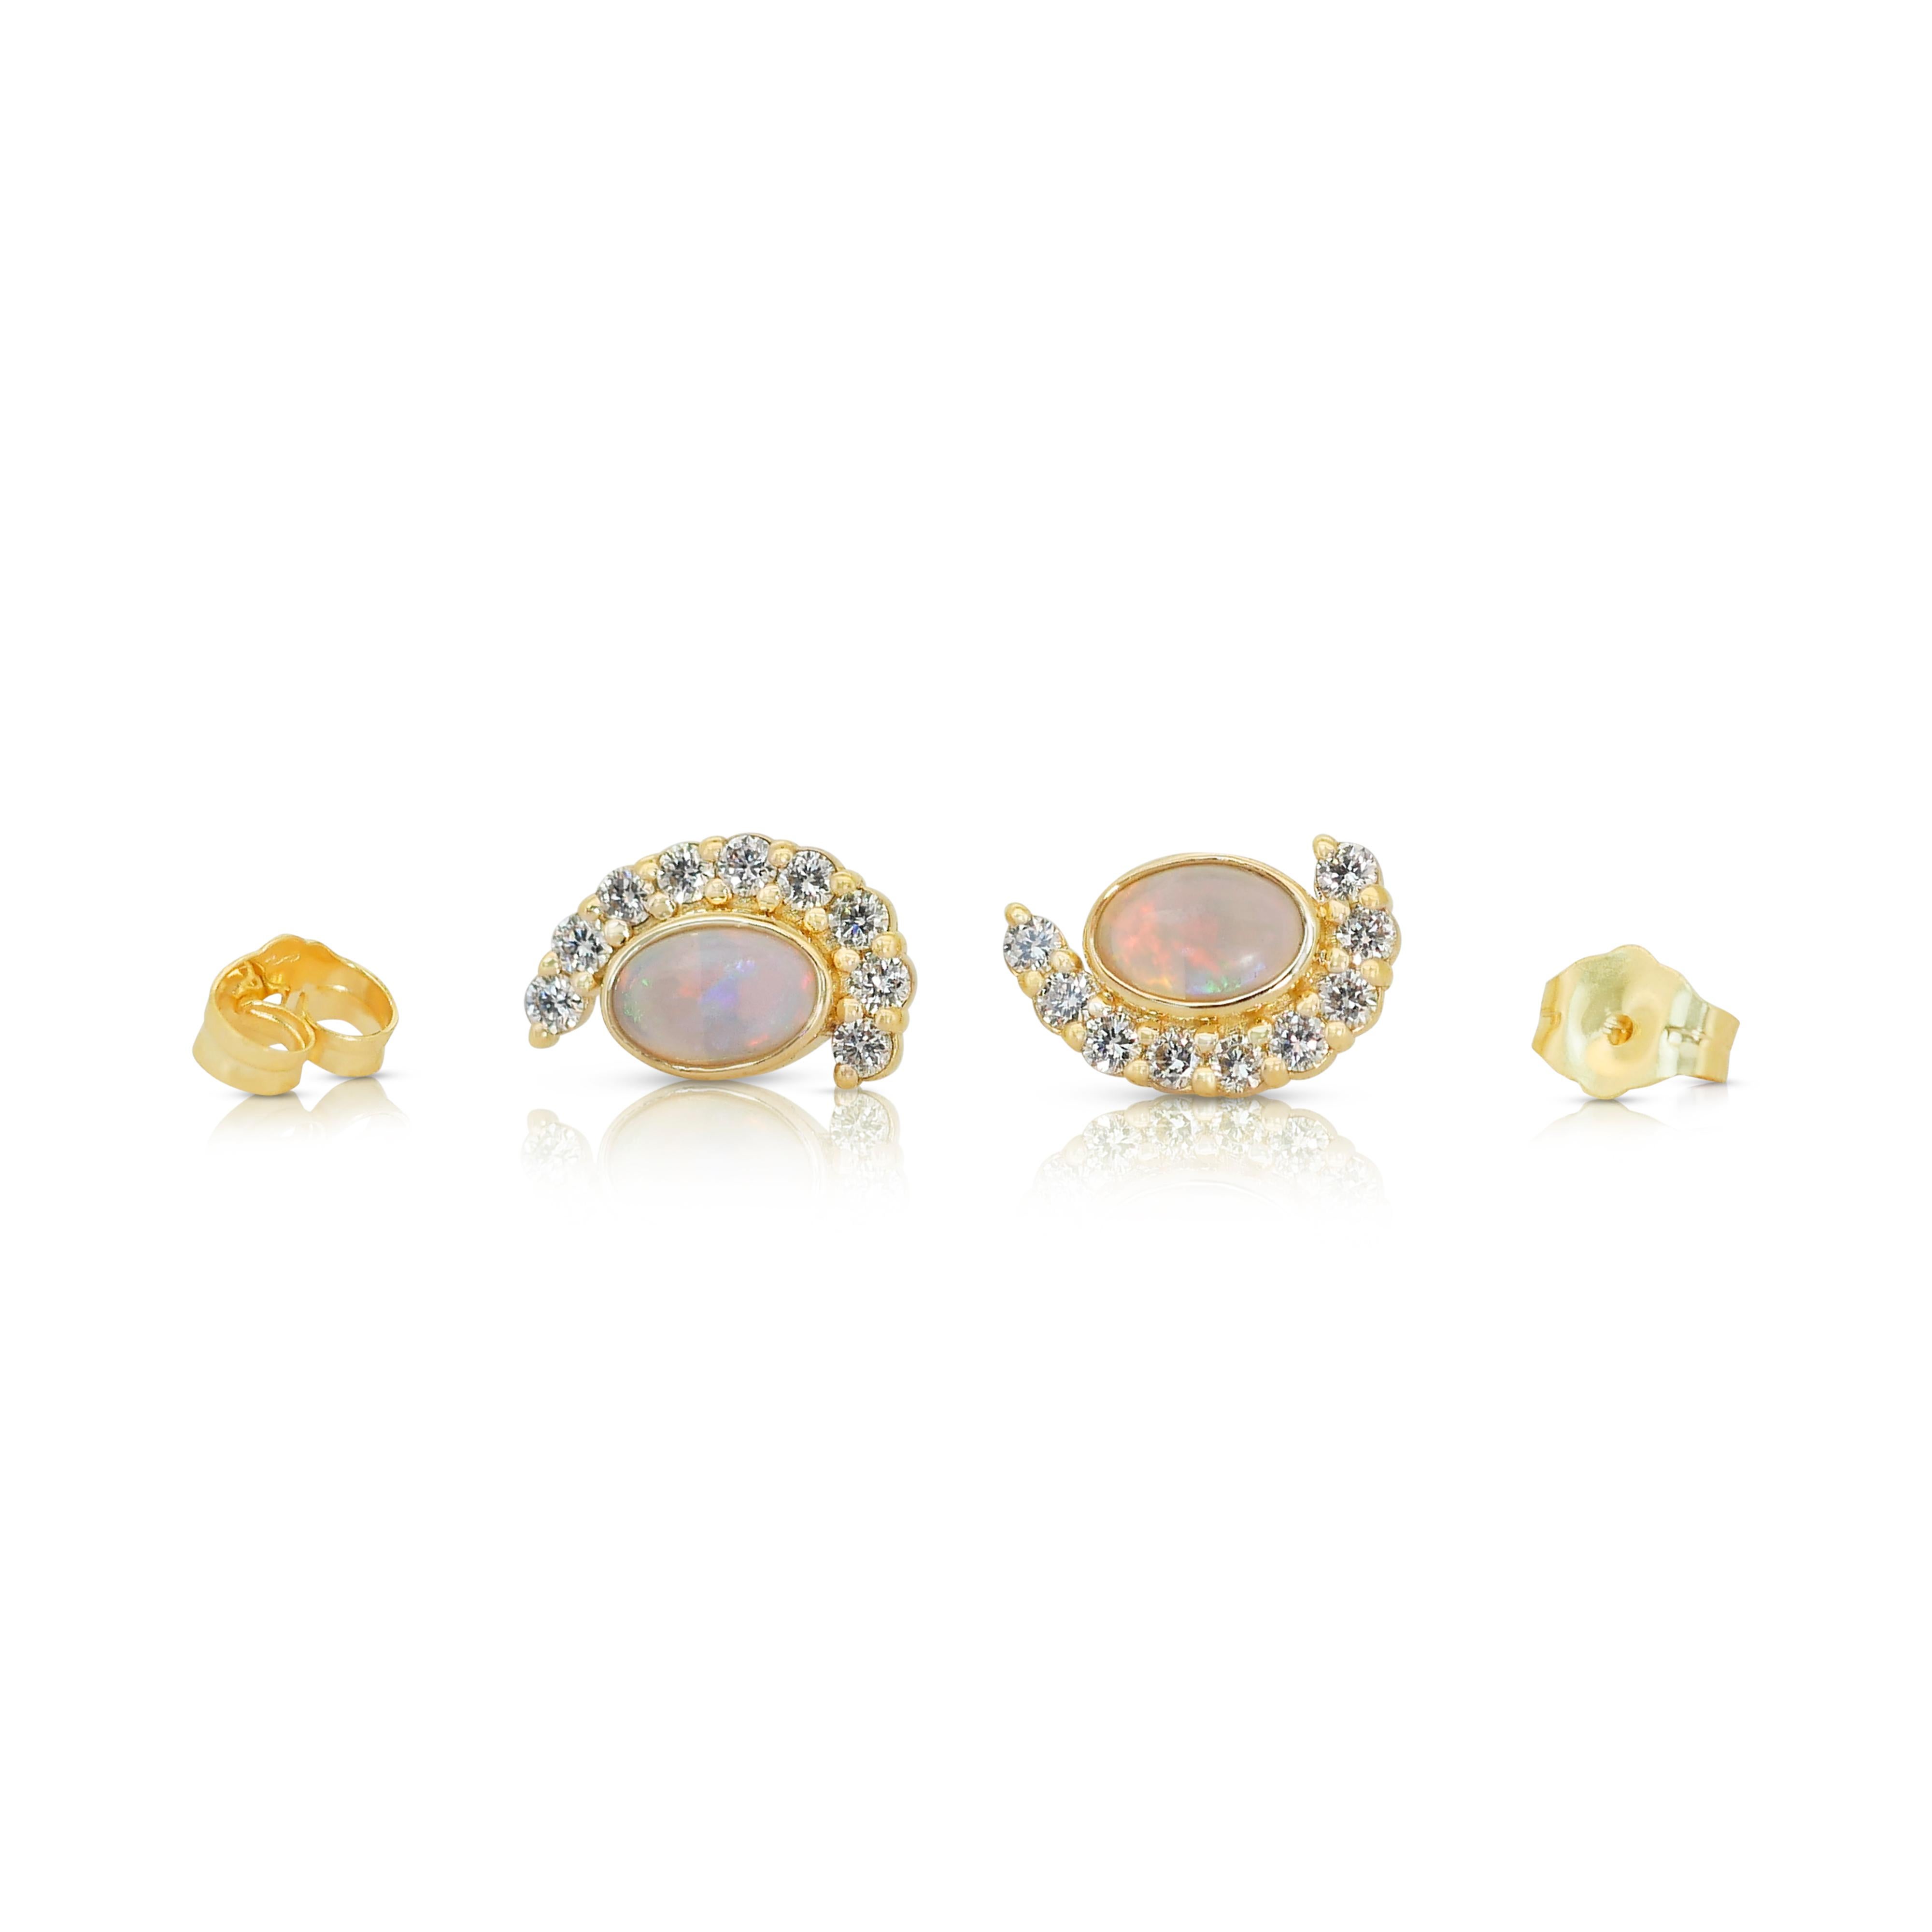  Lovely 14k Yellow Gold Opal and Diamond Halo Stud Earrings w/1.15 ct - IGI Cert For Sale 4